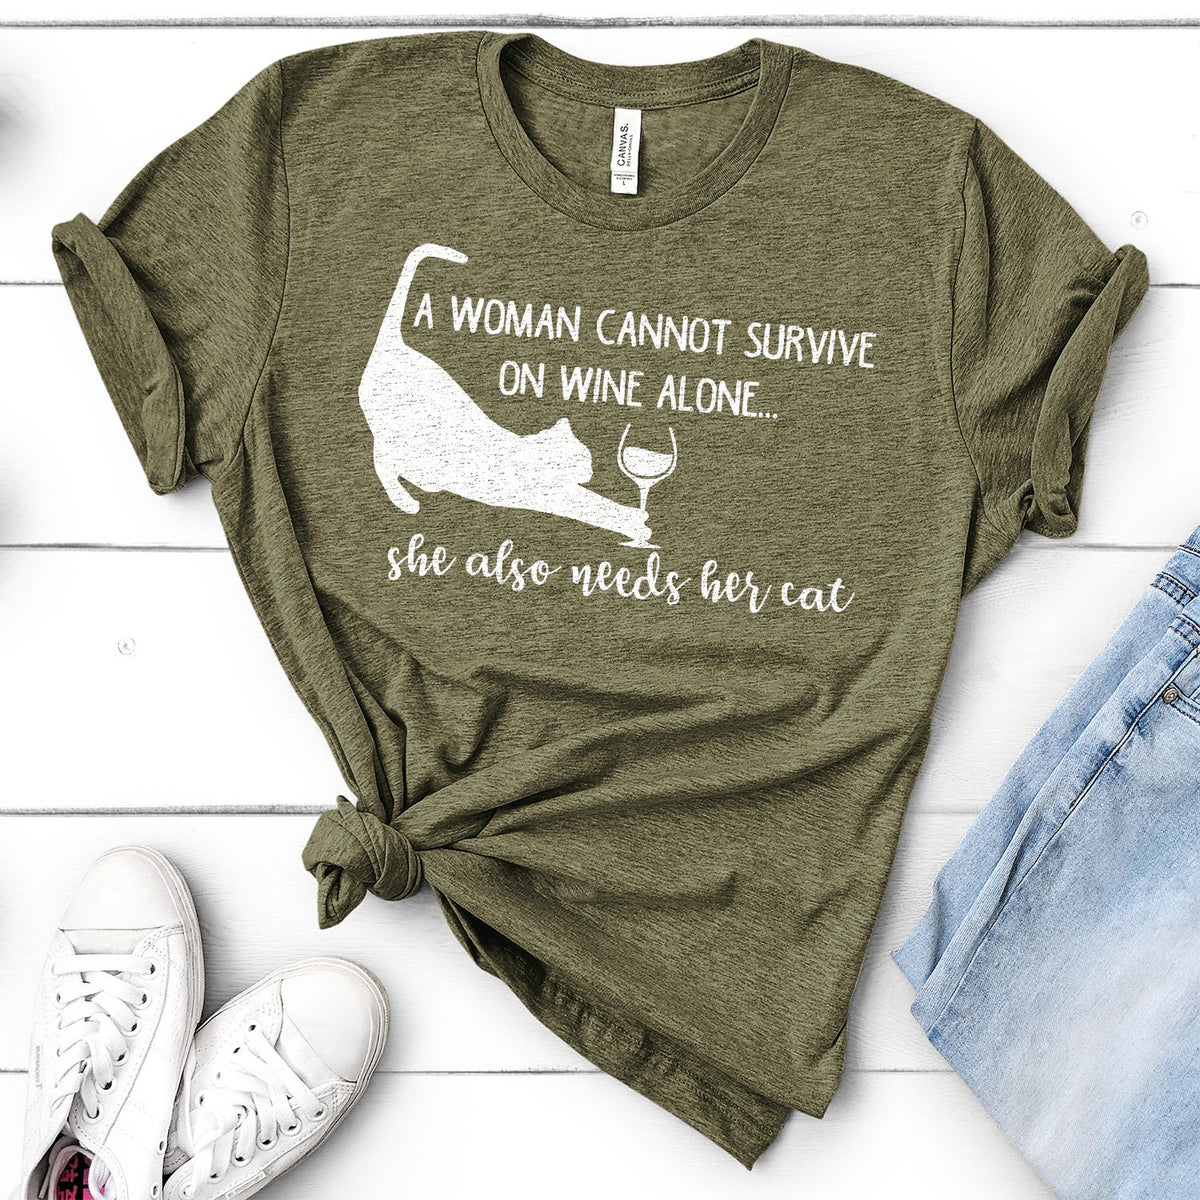 A Woman Cannot Survive on Wine Alone, She also Needs her Cat - Short Sleeve Tee Shirt